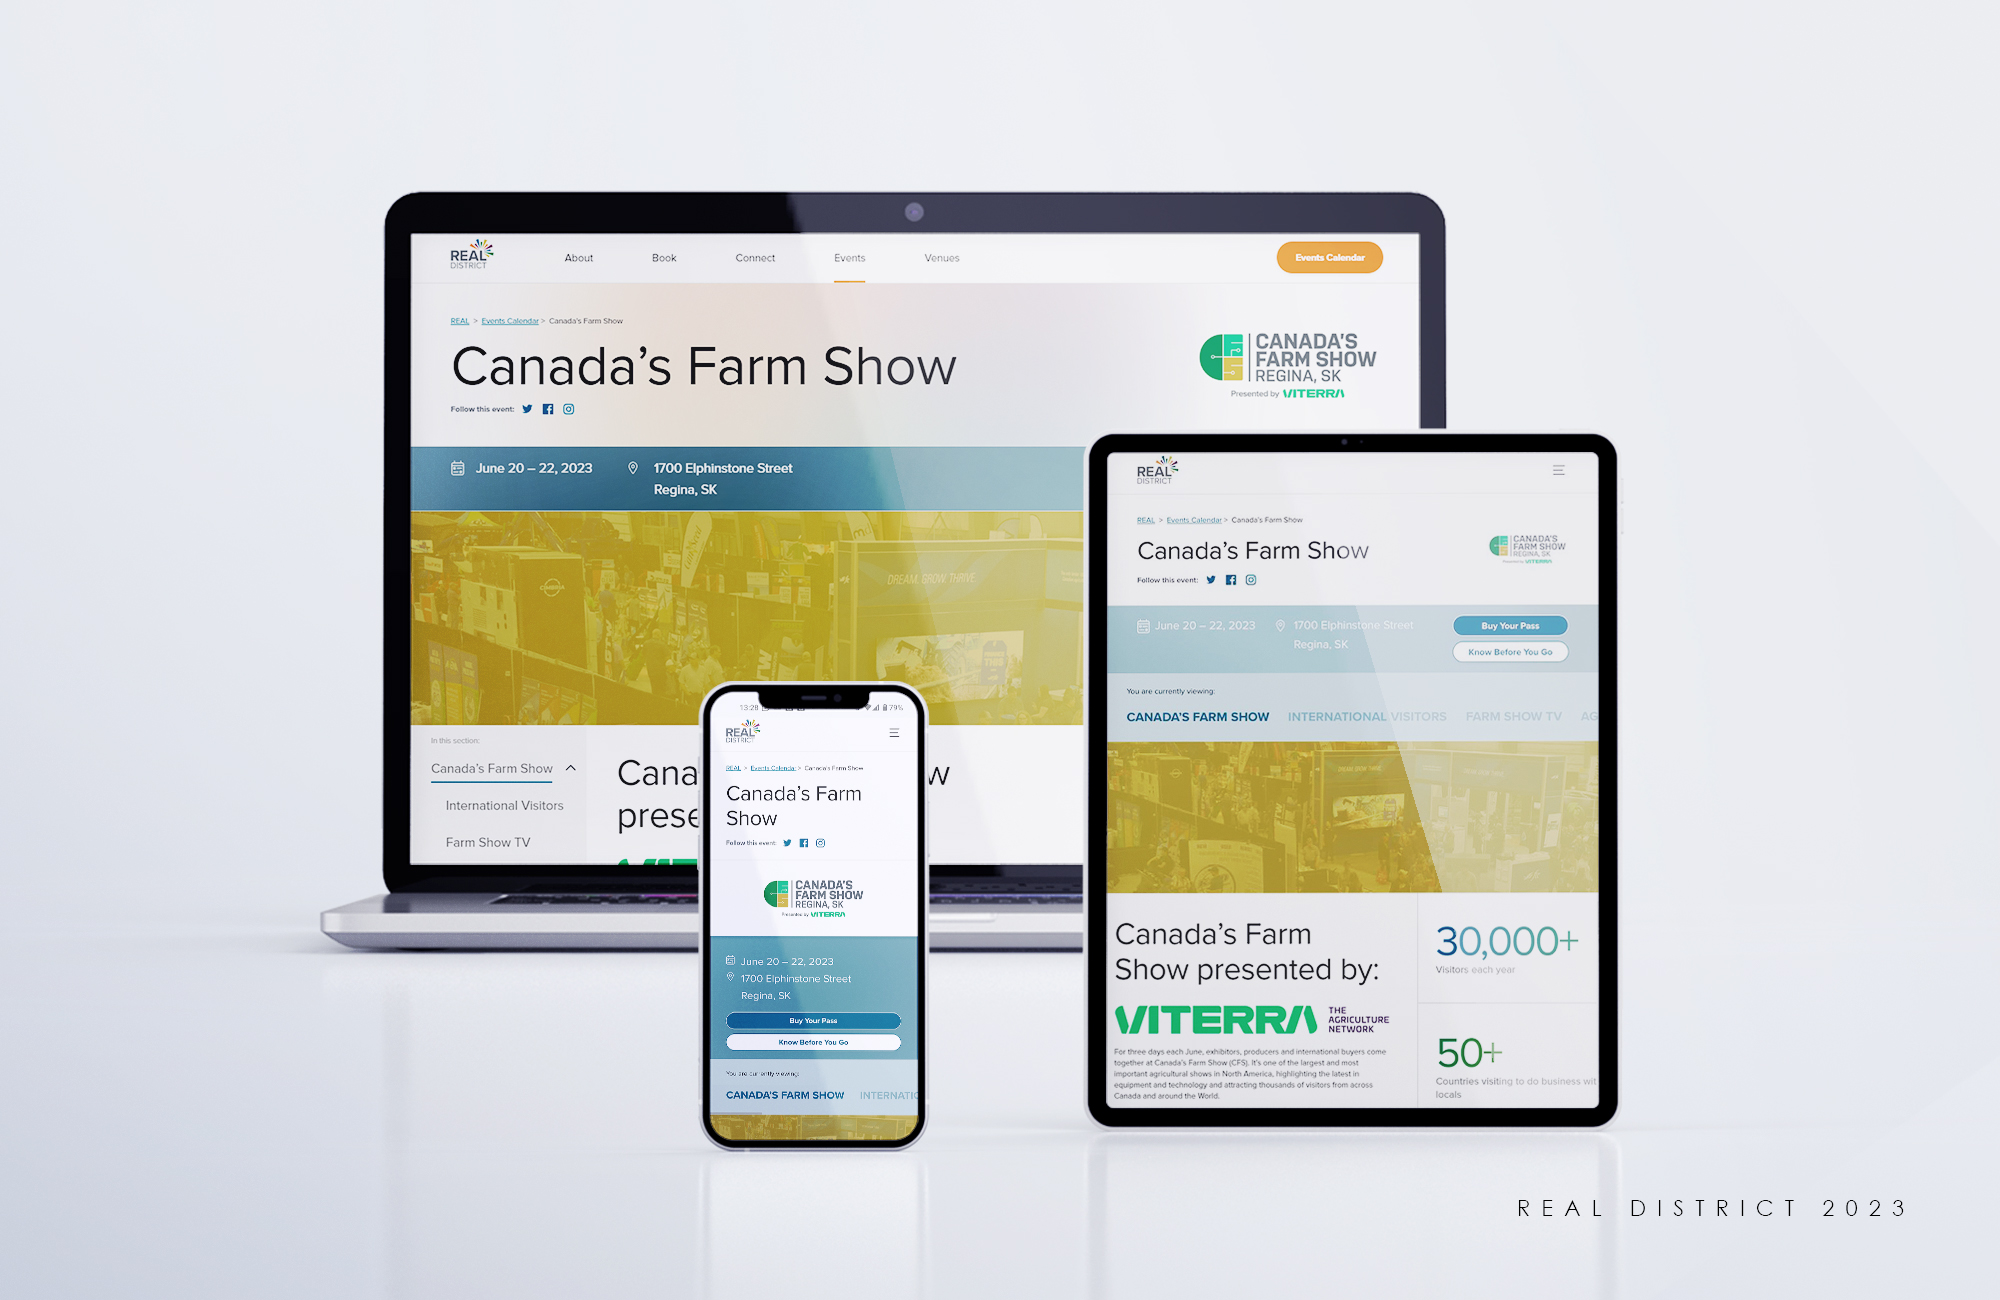 Canada's Farm Show web mockup after the REAL District website redesign